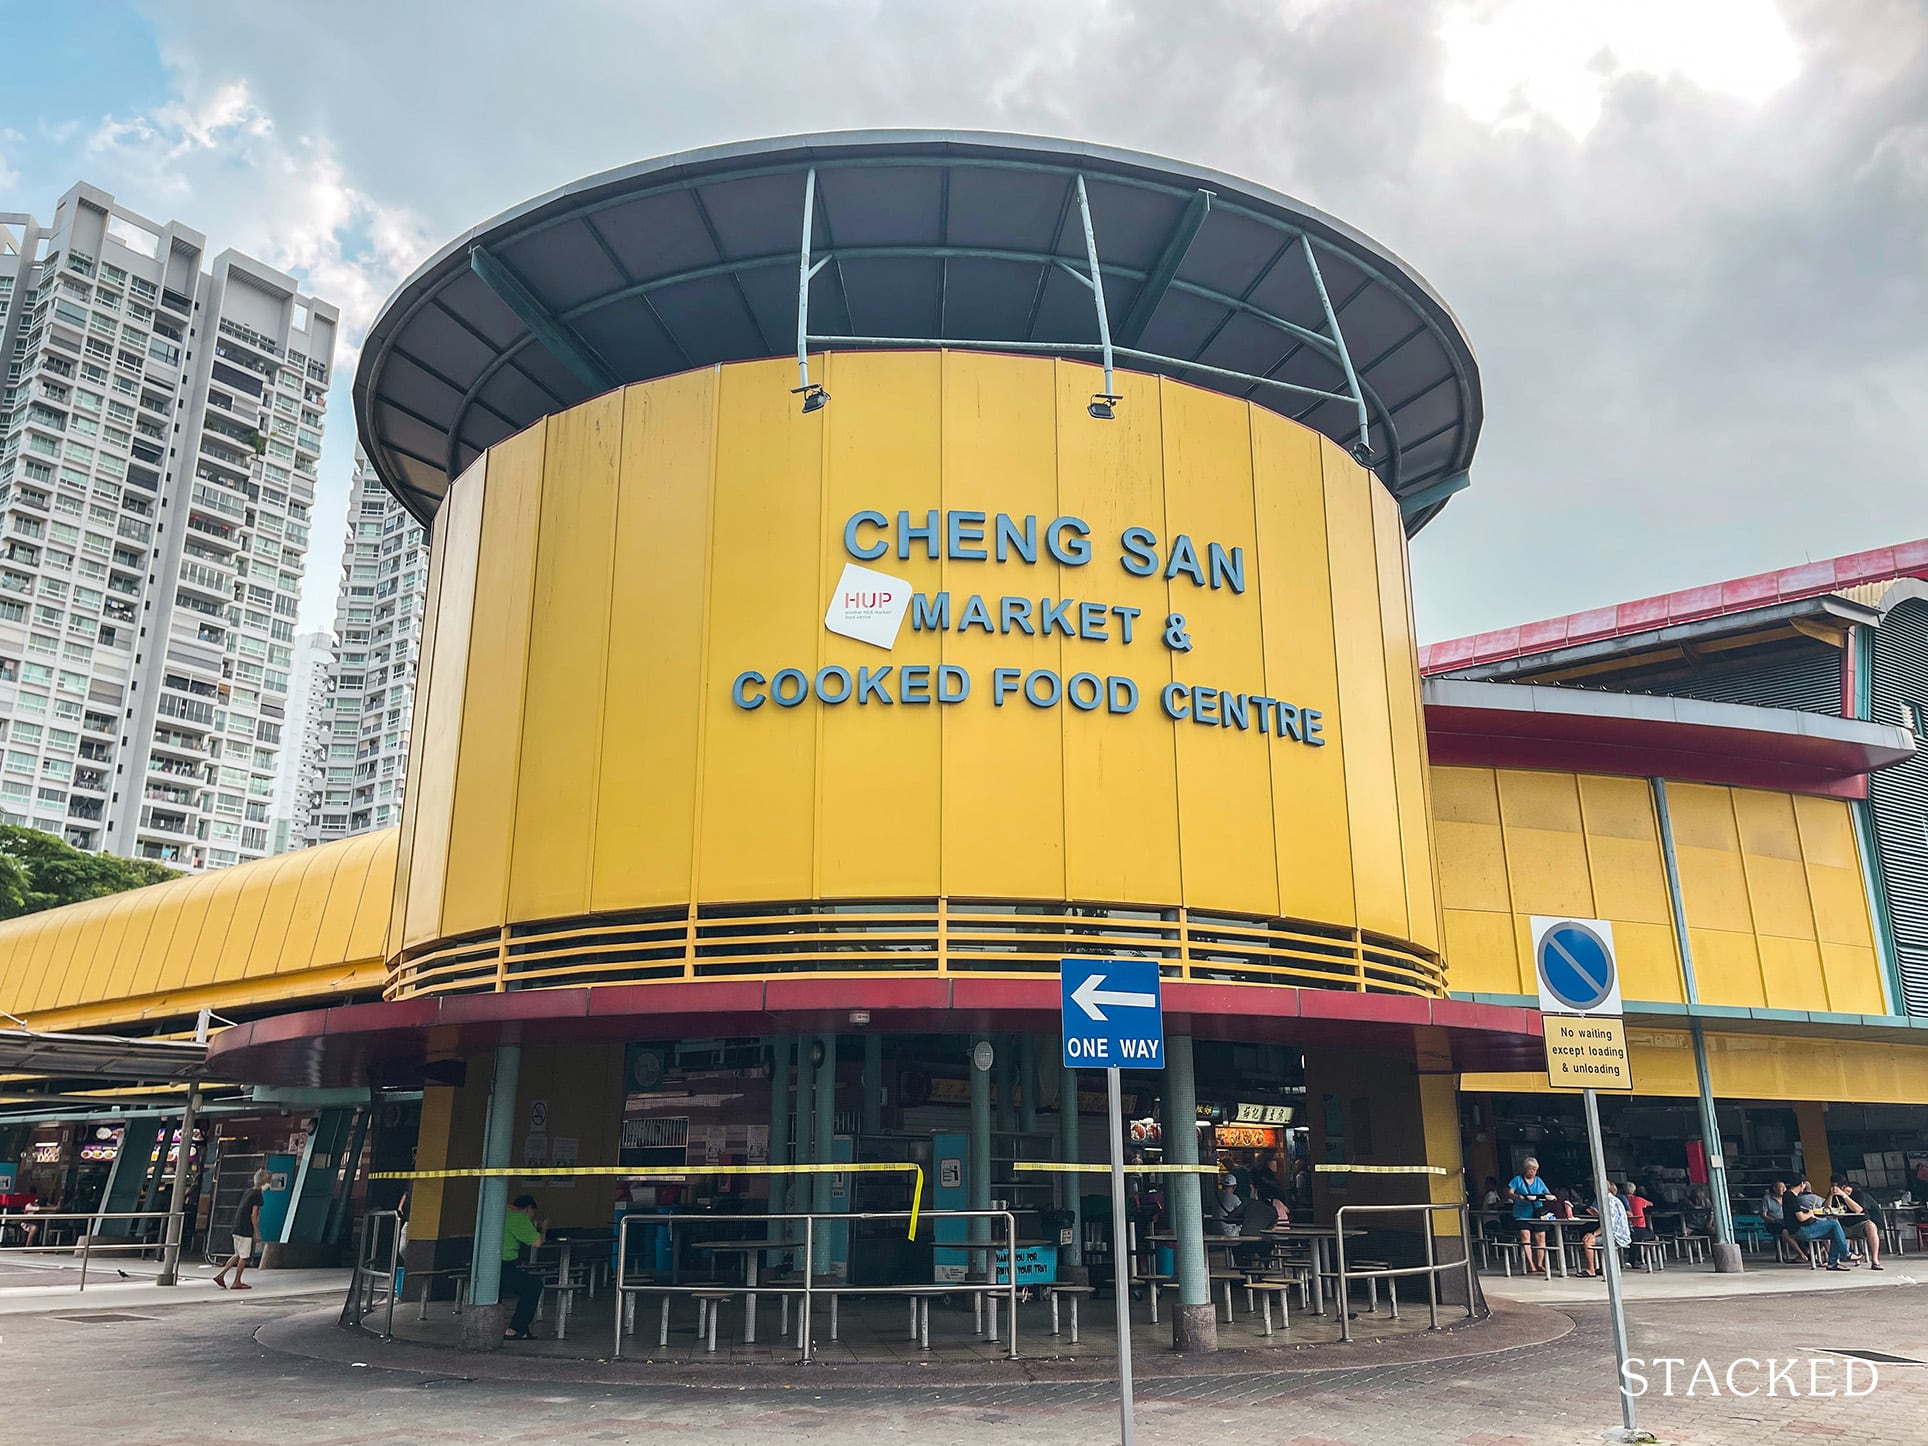 Park Central @ AMK Chengsan Market and Cooked Food Centre